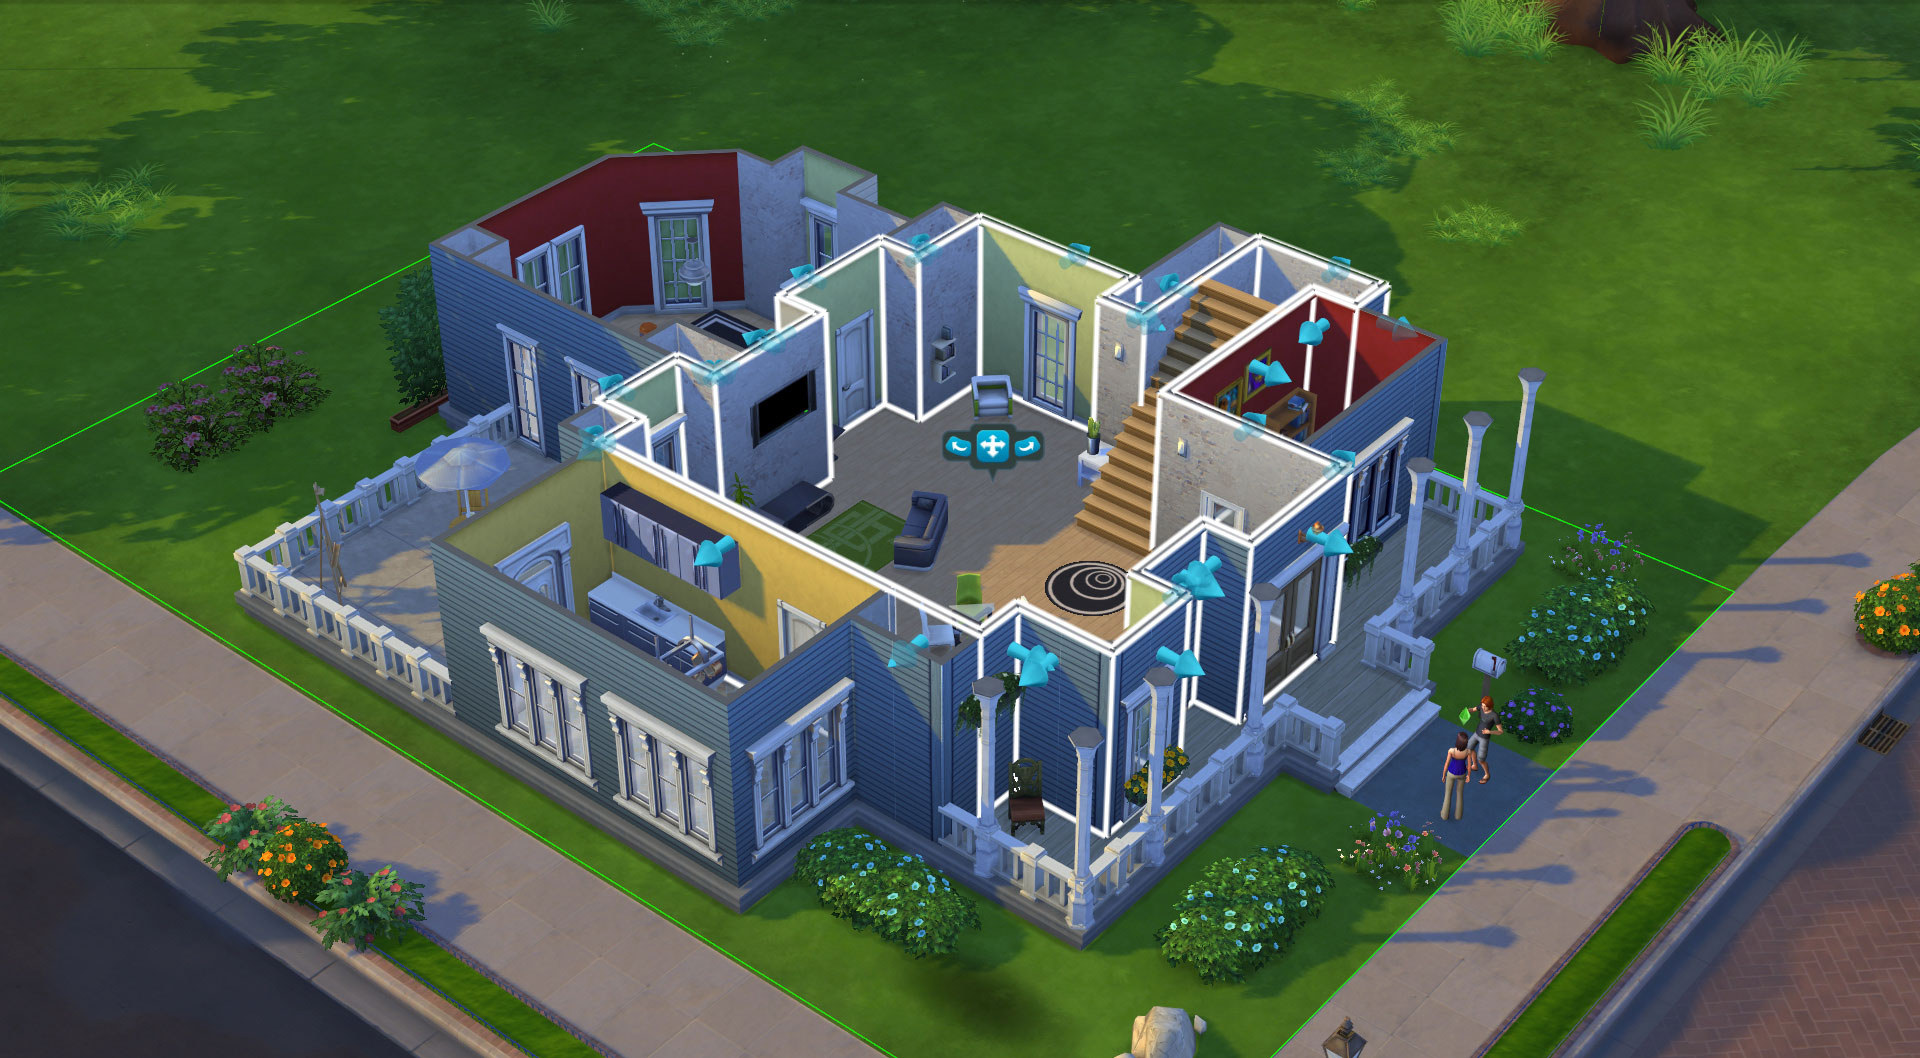 Geek insider, geekinsider, geekinsider. Com,, the sims 4 to be released on september 2, gaming